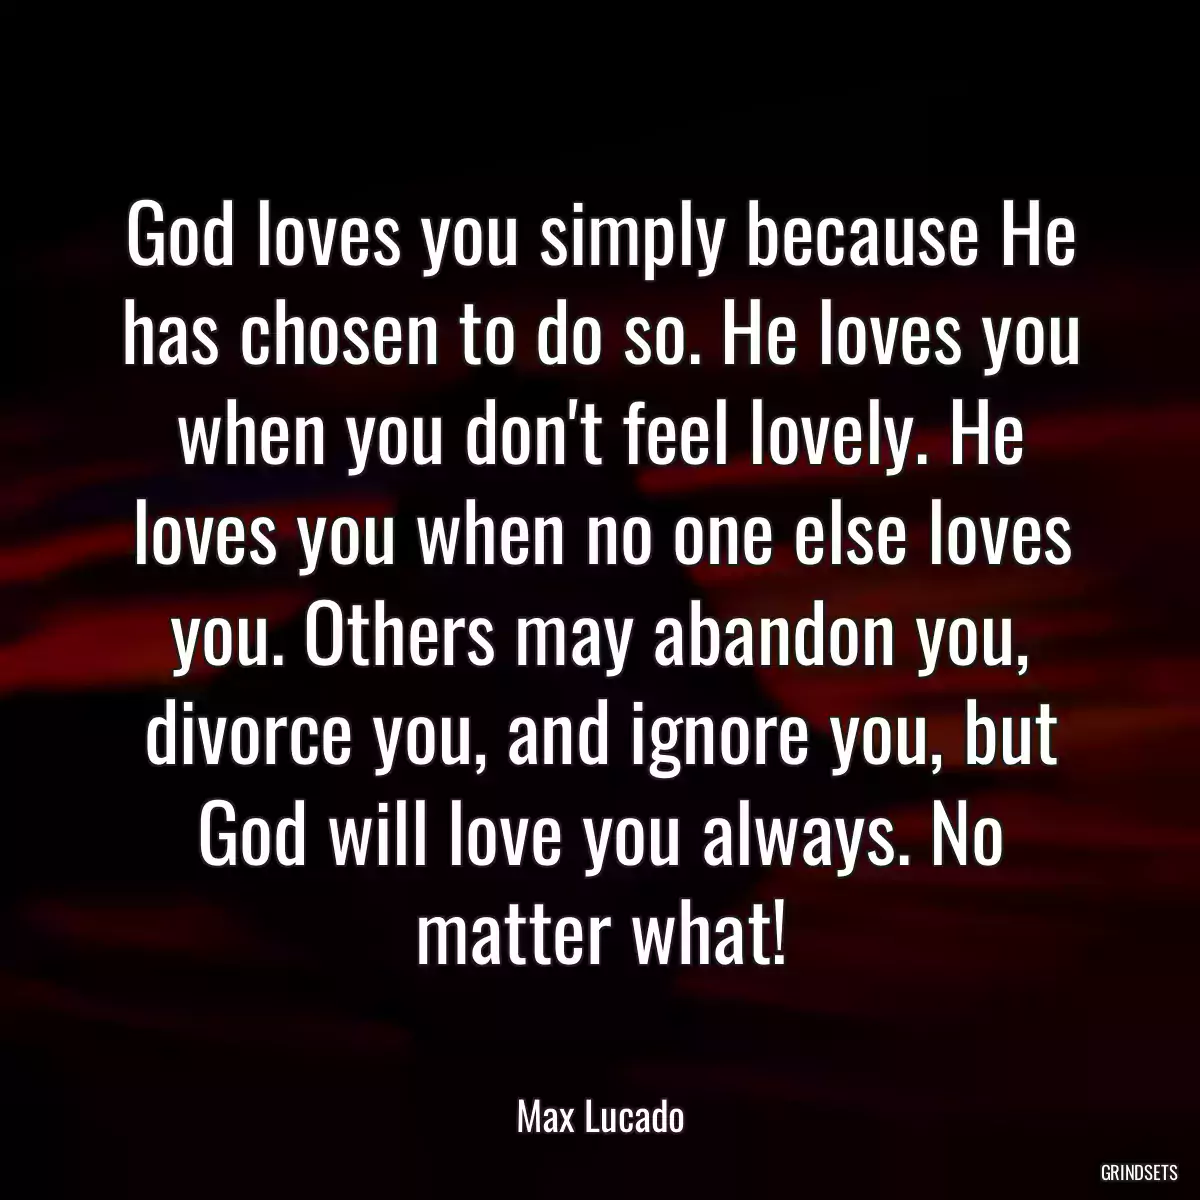 God loves you simply because He has chosen to do so. He loves you when you don\'t feel lovely. He loves you when no one else loves you. Others may abandon you, divorce you, and ignore you, but God will love you always. No matter what!